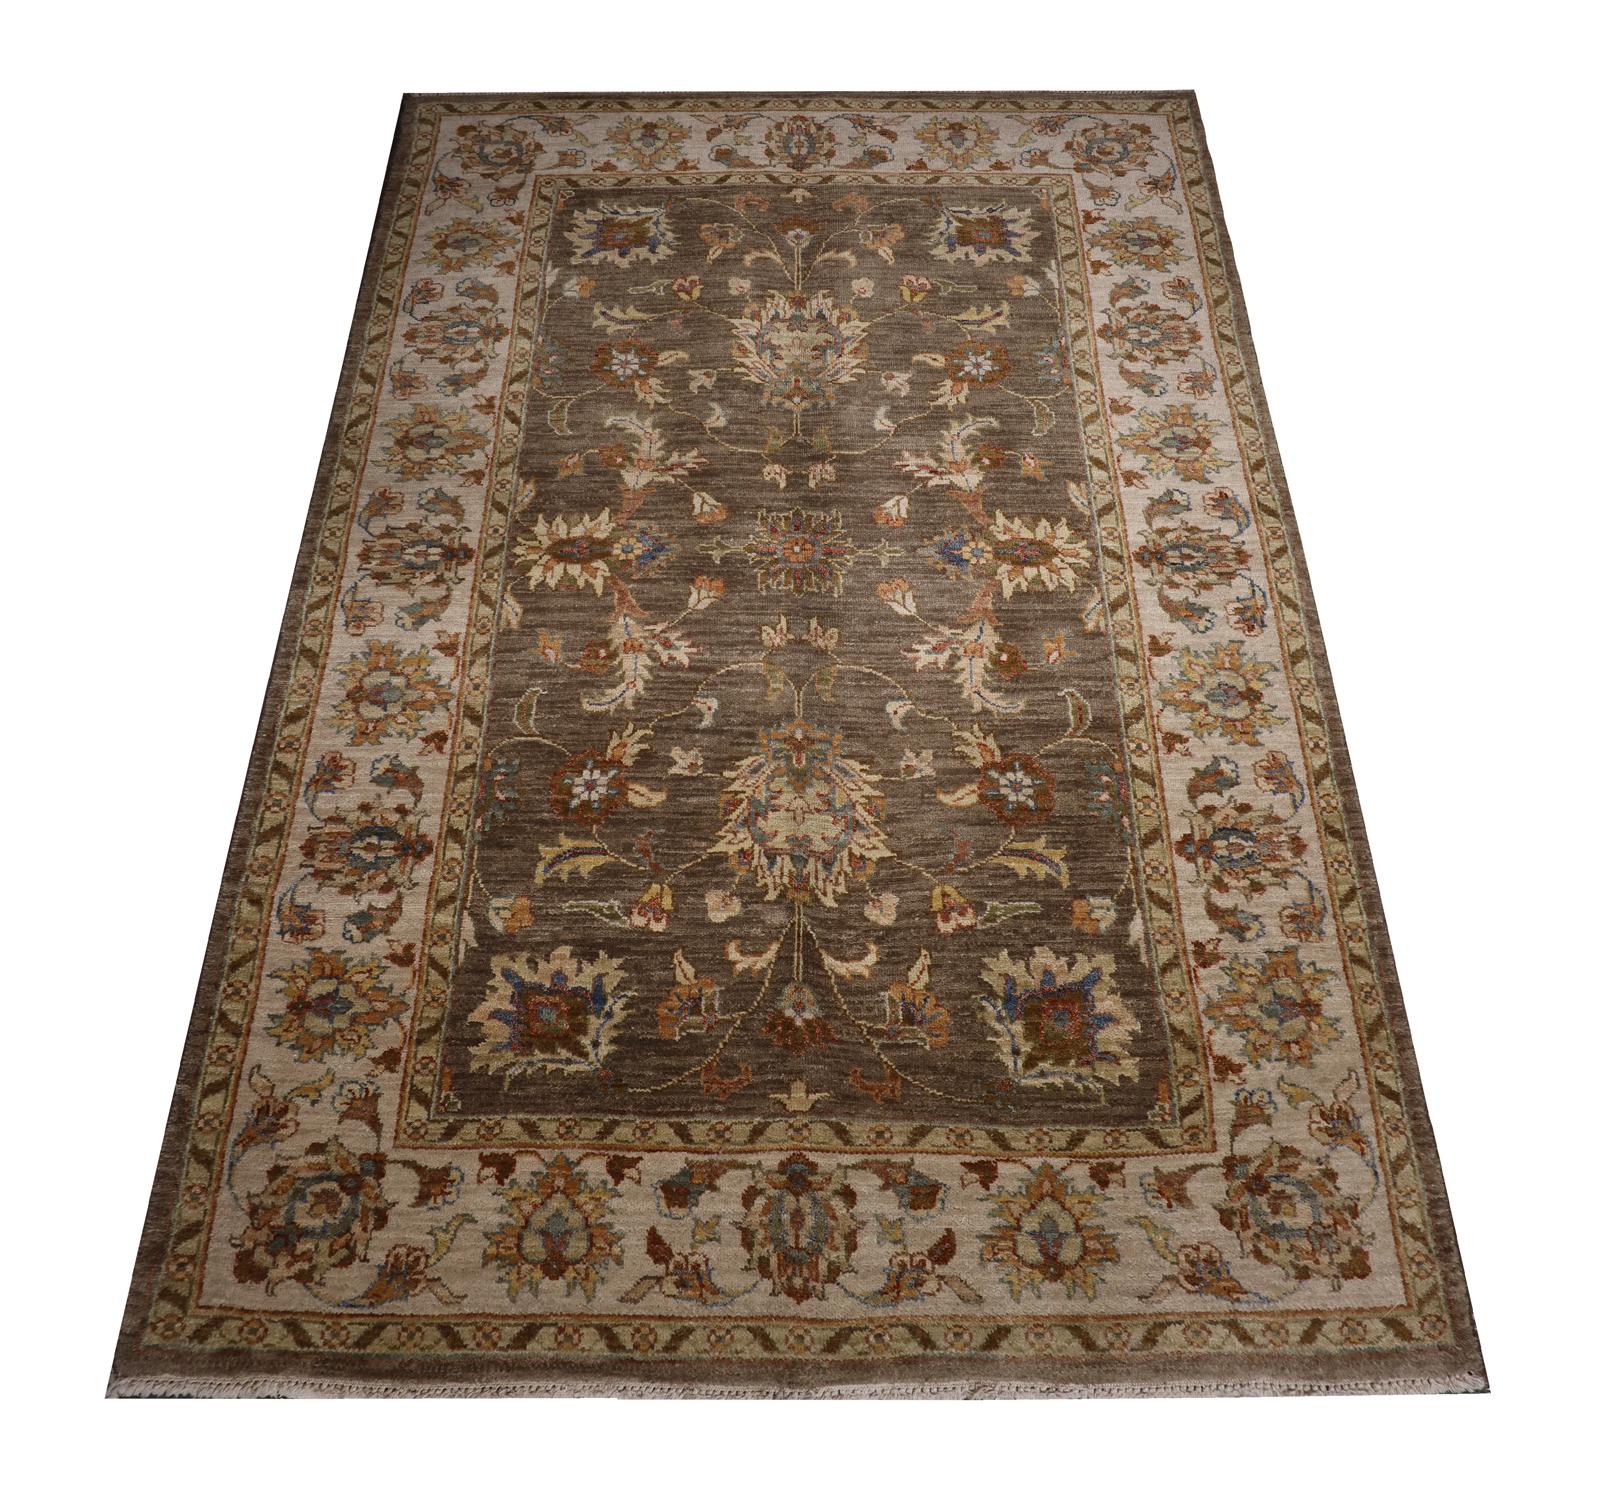 This vintage carpet is an Indian Ziegler rug woven by hand with fine wool and cotton. The design has been woven with a luxurious brown background with accents of cream, beige and orange that make up the symmetrical floral design. The traditional